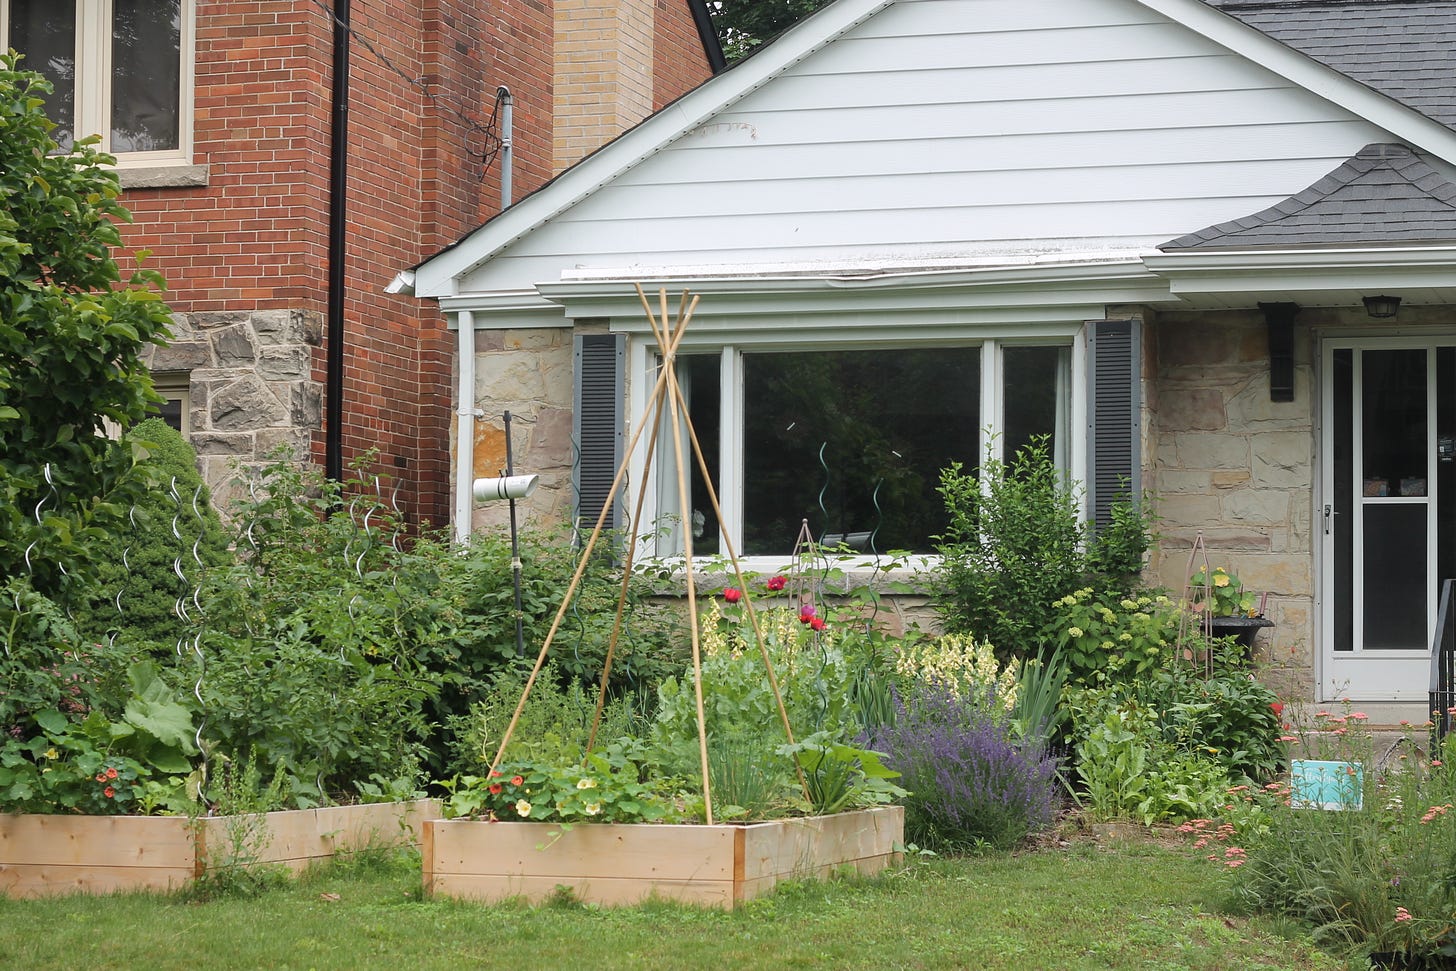 A bungalow with a garden and two raised veggie beds in front of it 